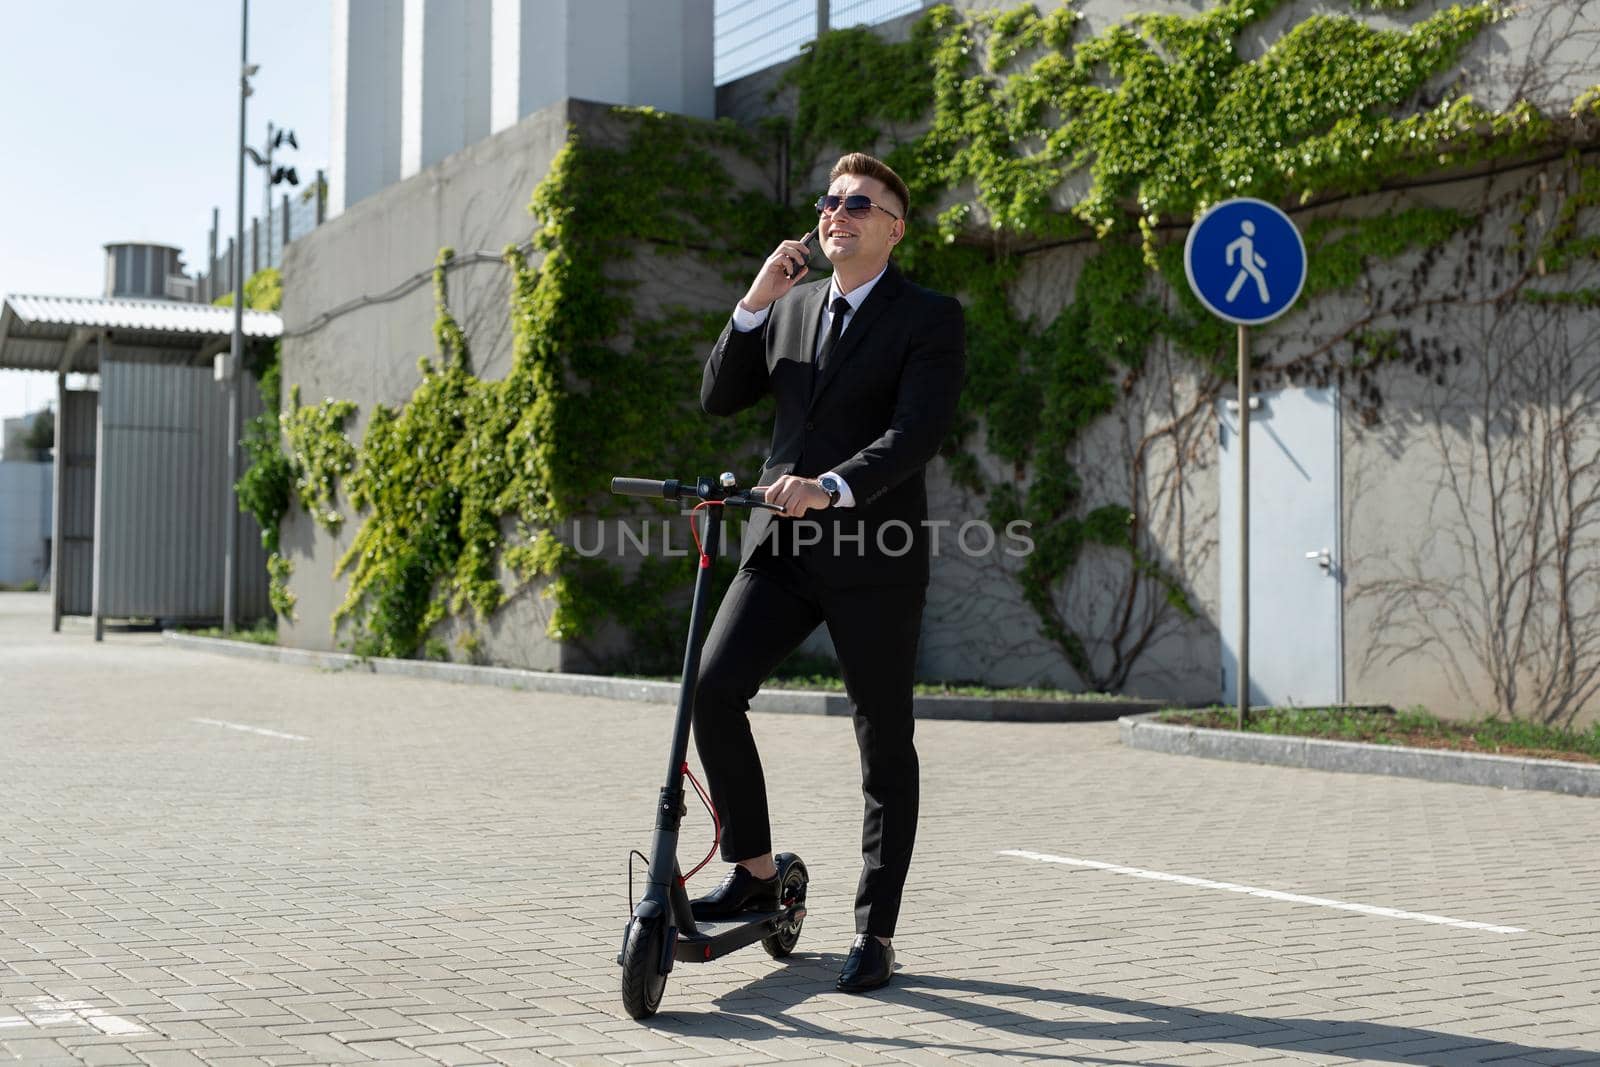 Man in a black business suit stands next to an electric scooter and talks on the phone.